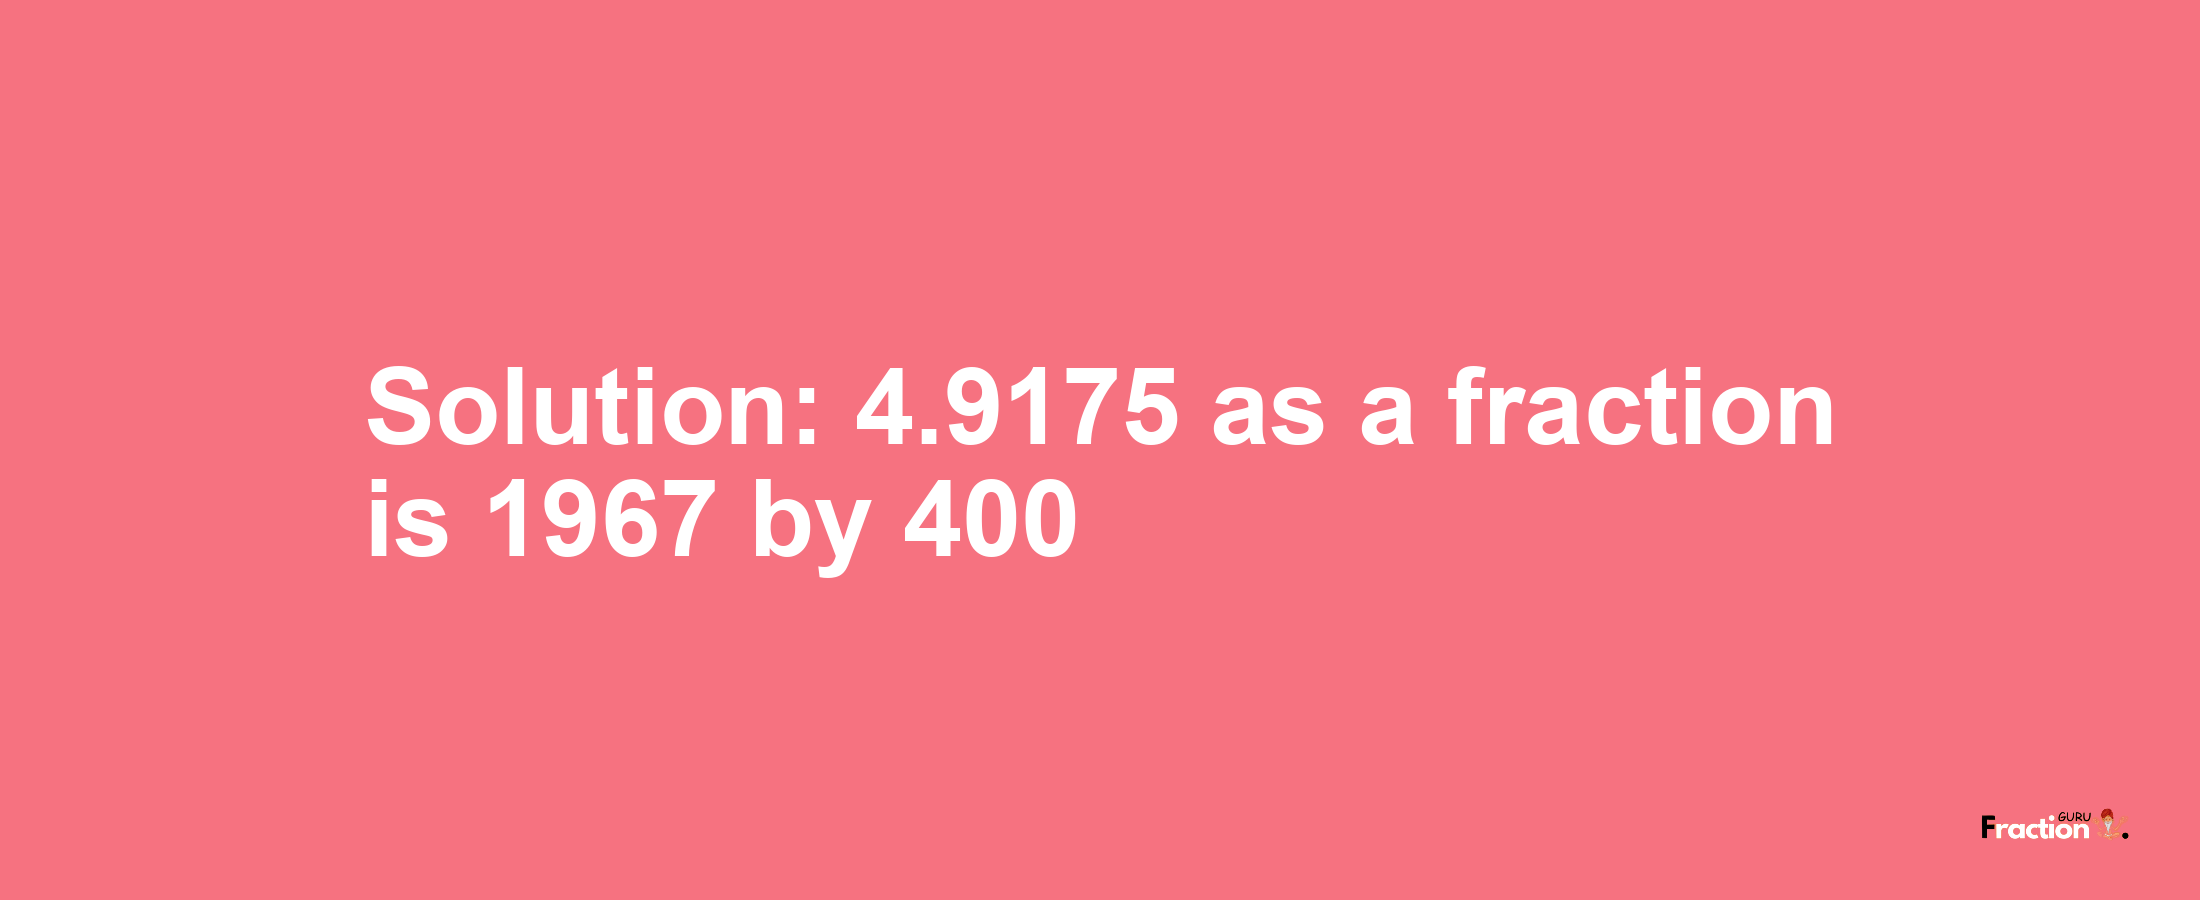 Solution:4.9175 as a fraction is 1967/400